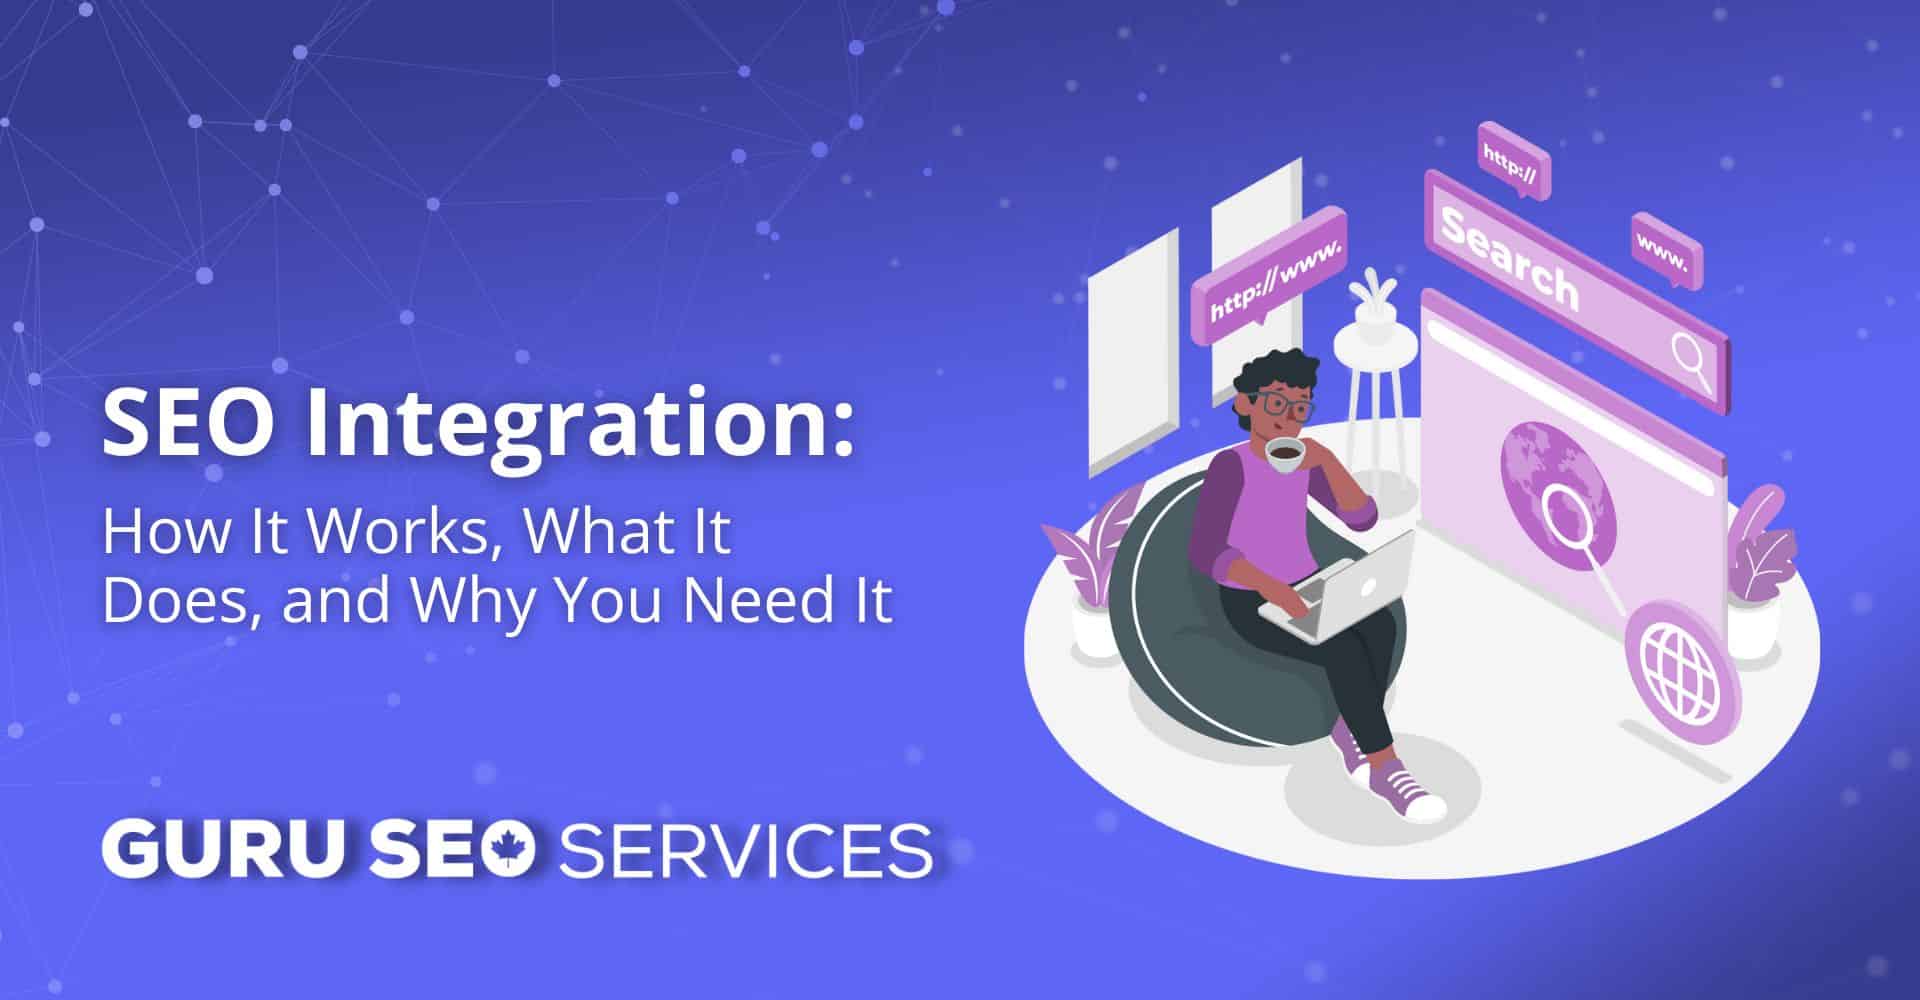 Learn how SEO integration works, why you need SEO services.